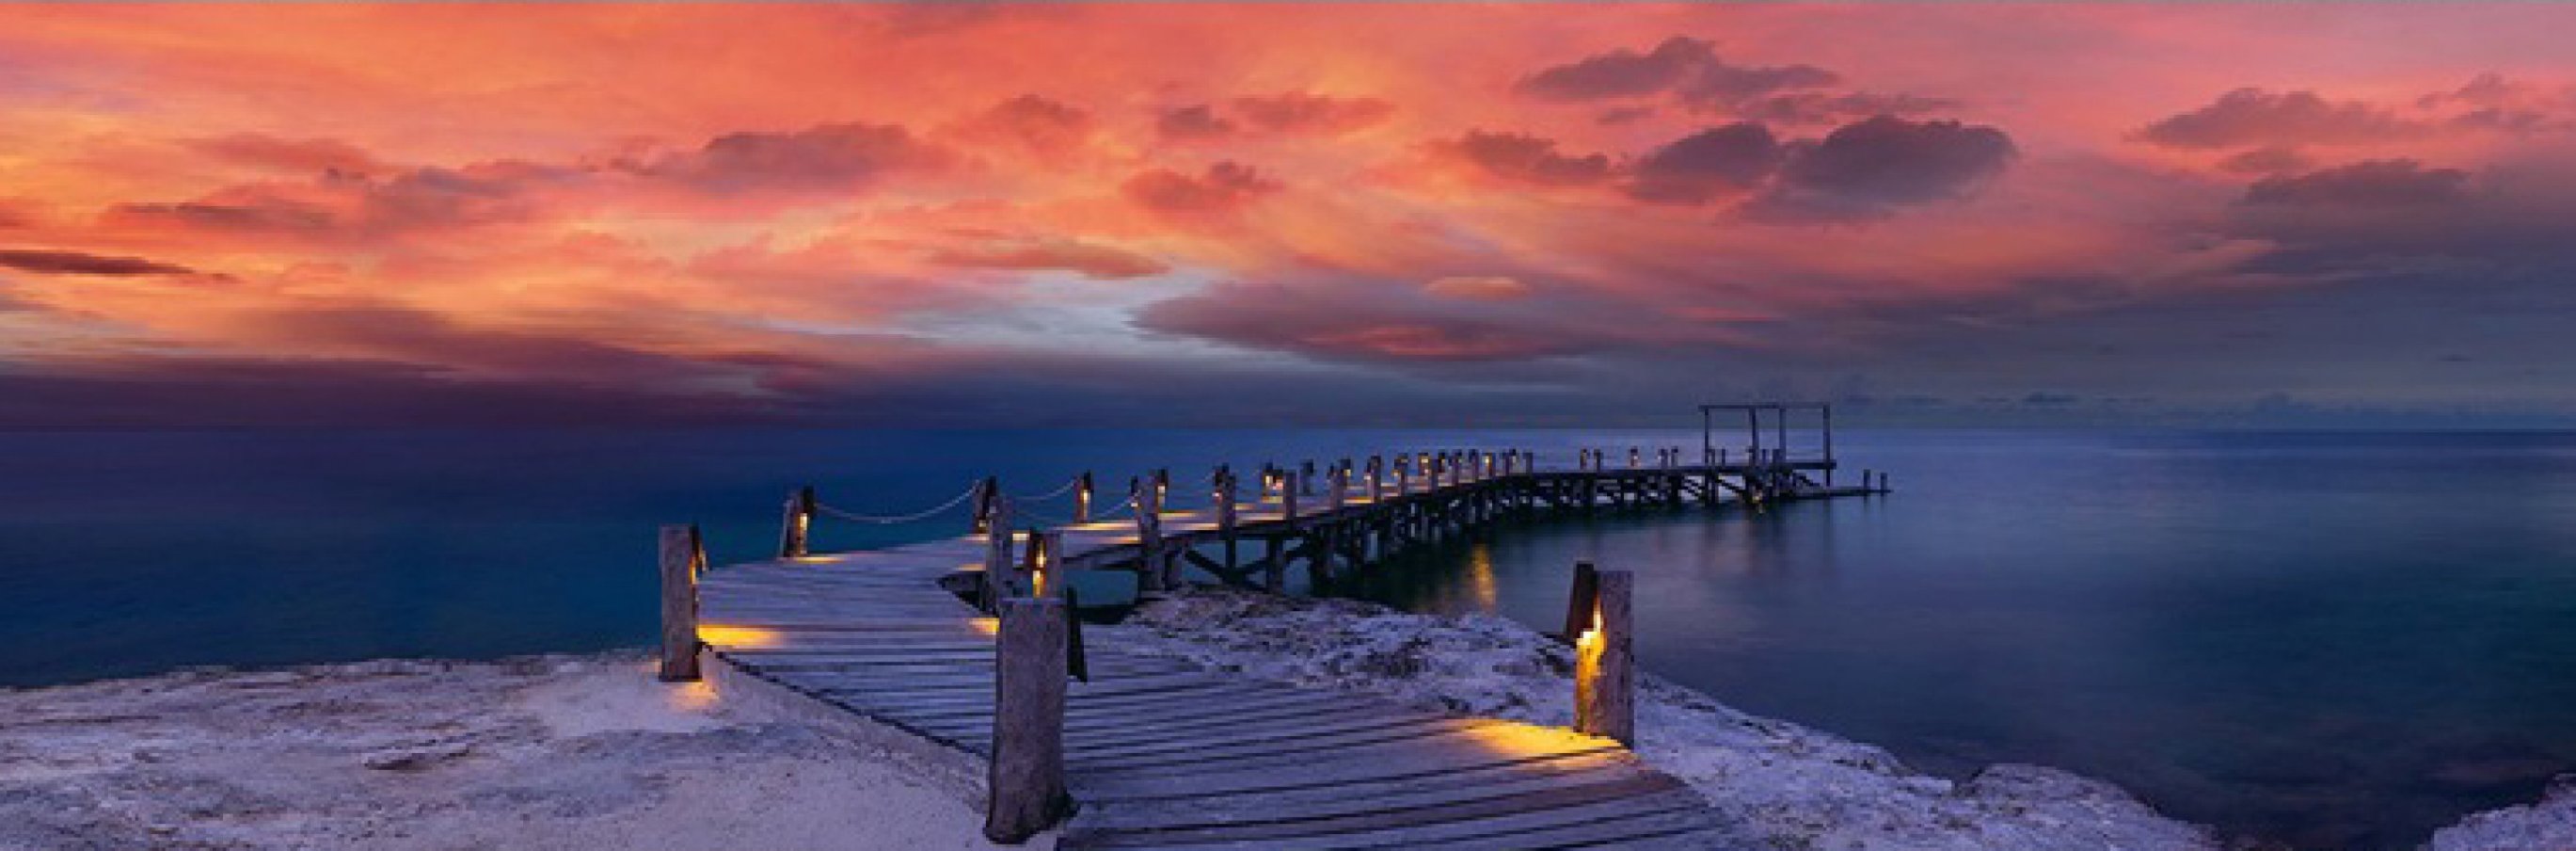 Enchanted Jetty 2M Huge Panorama by Peter Lik